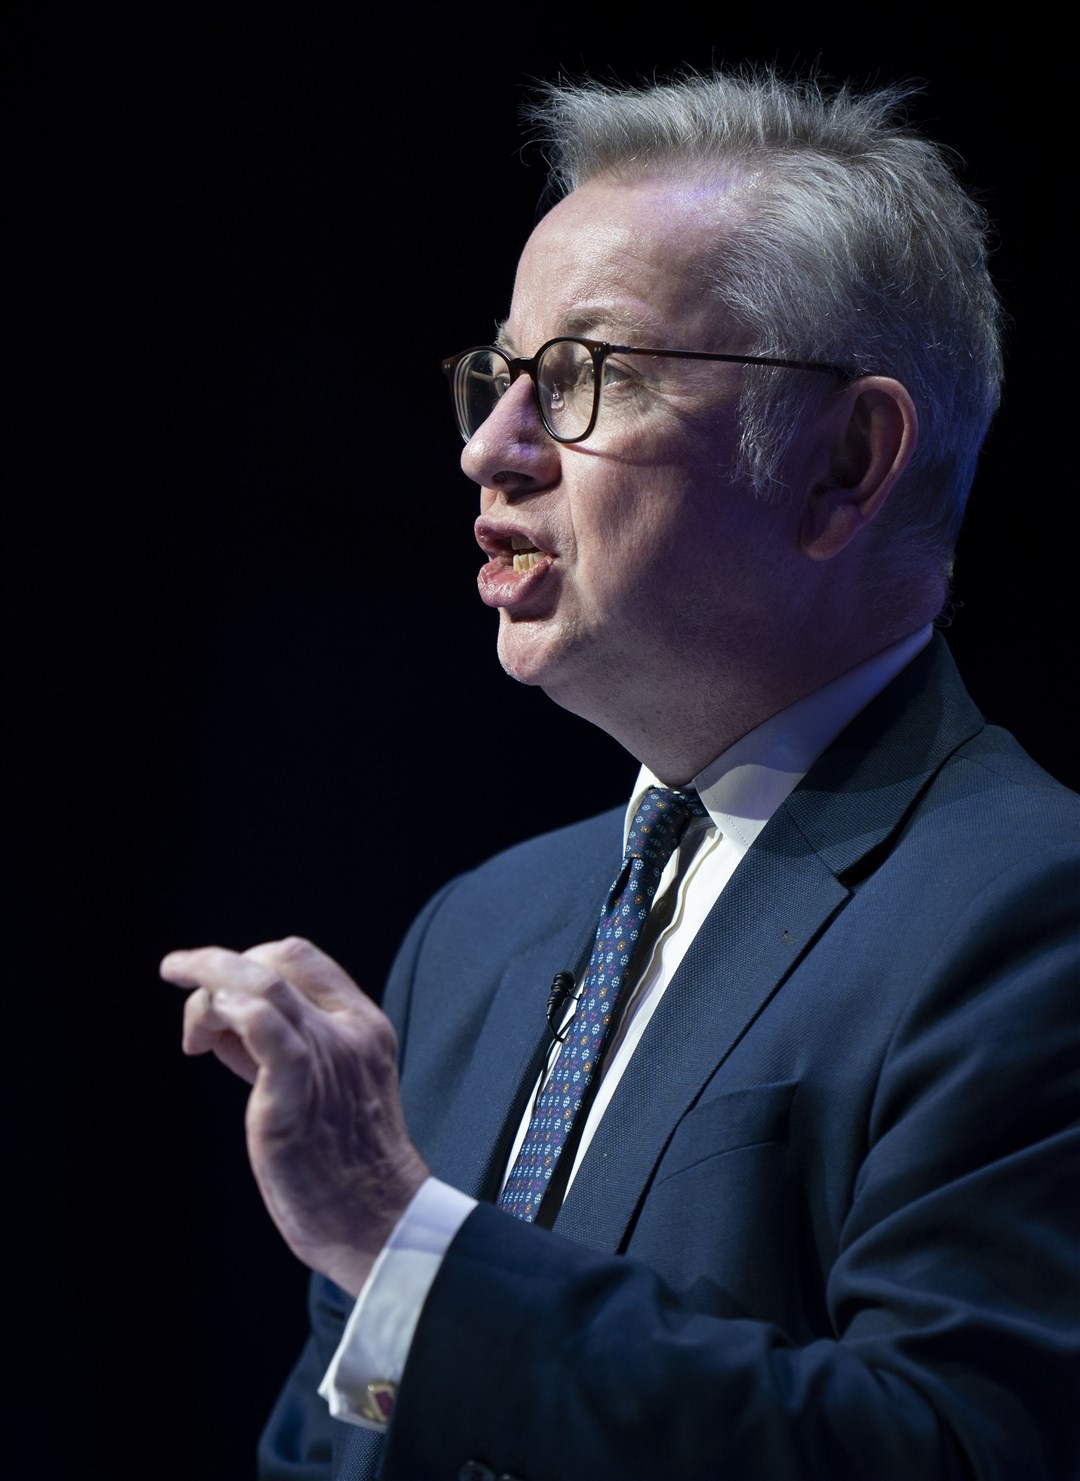 Michael Gove said he wanted to hear from island communities directly (Danny Lawson/PA)